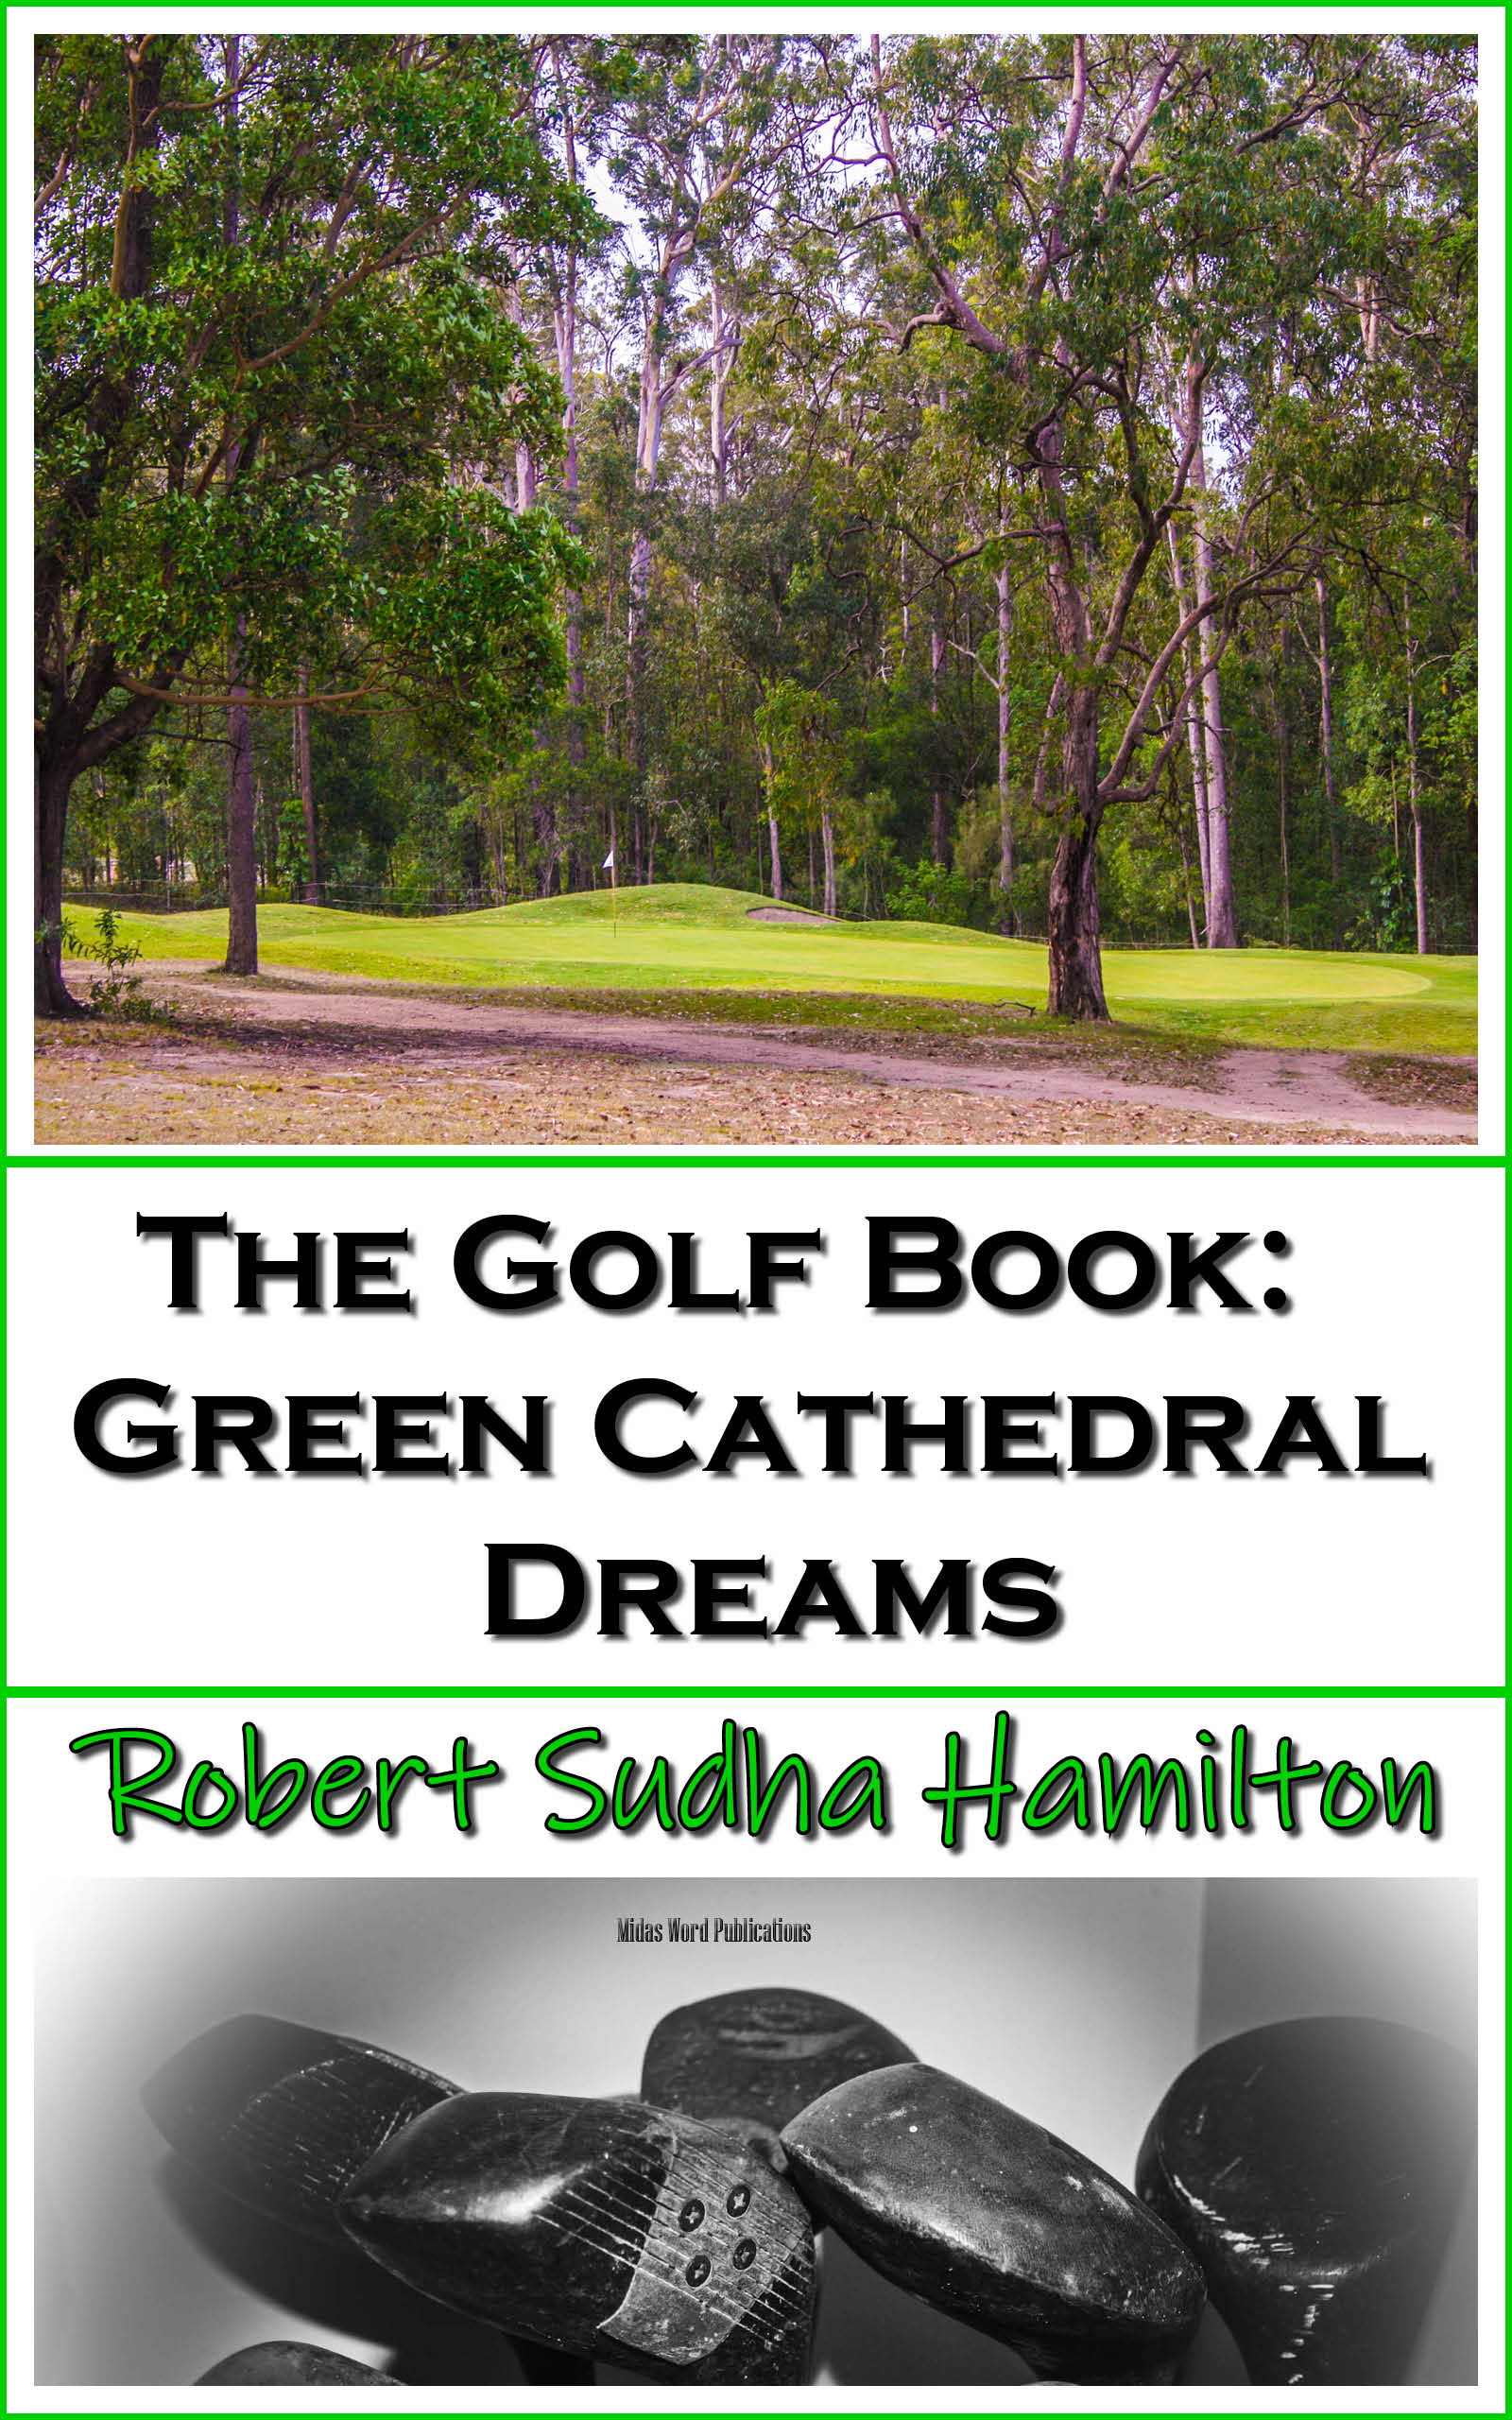 The Golf Book: Green Cathedral Dreams